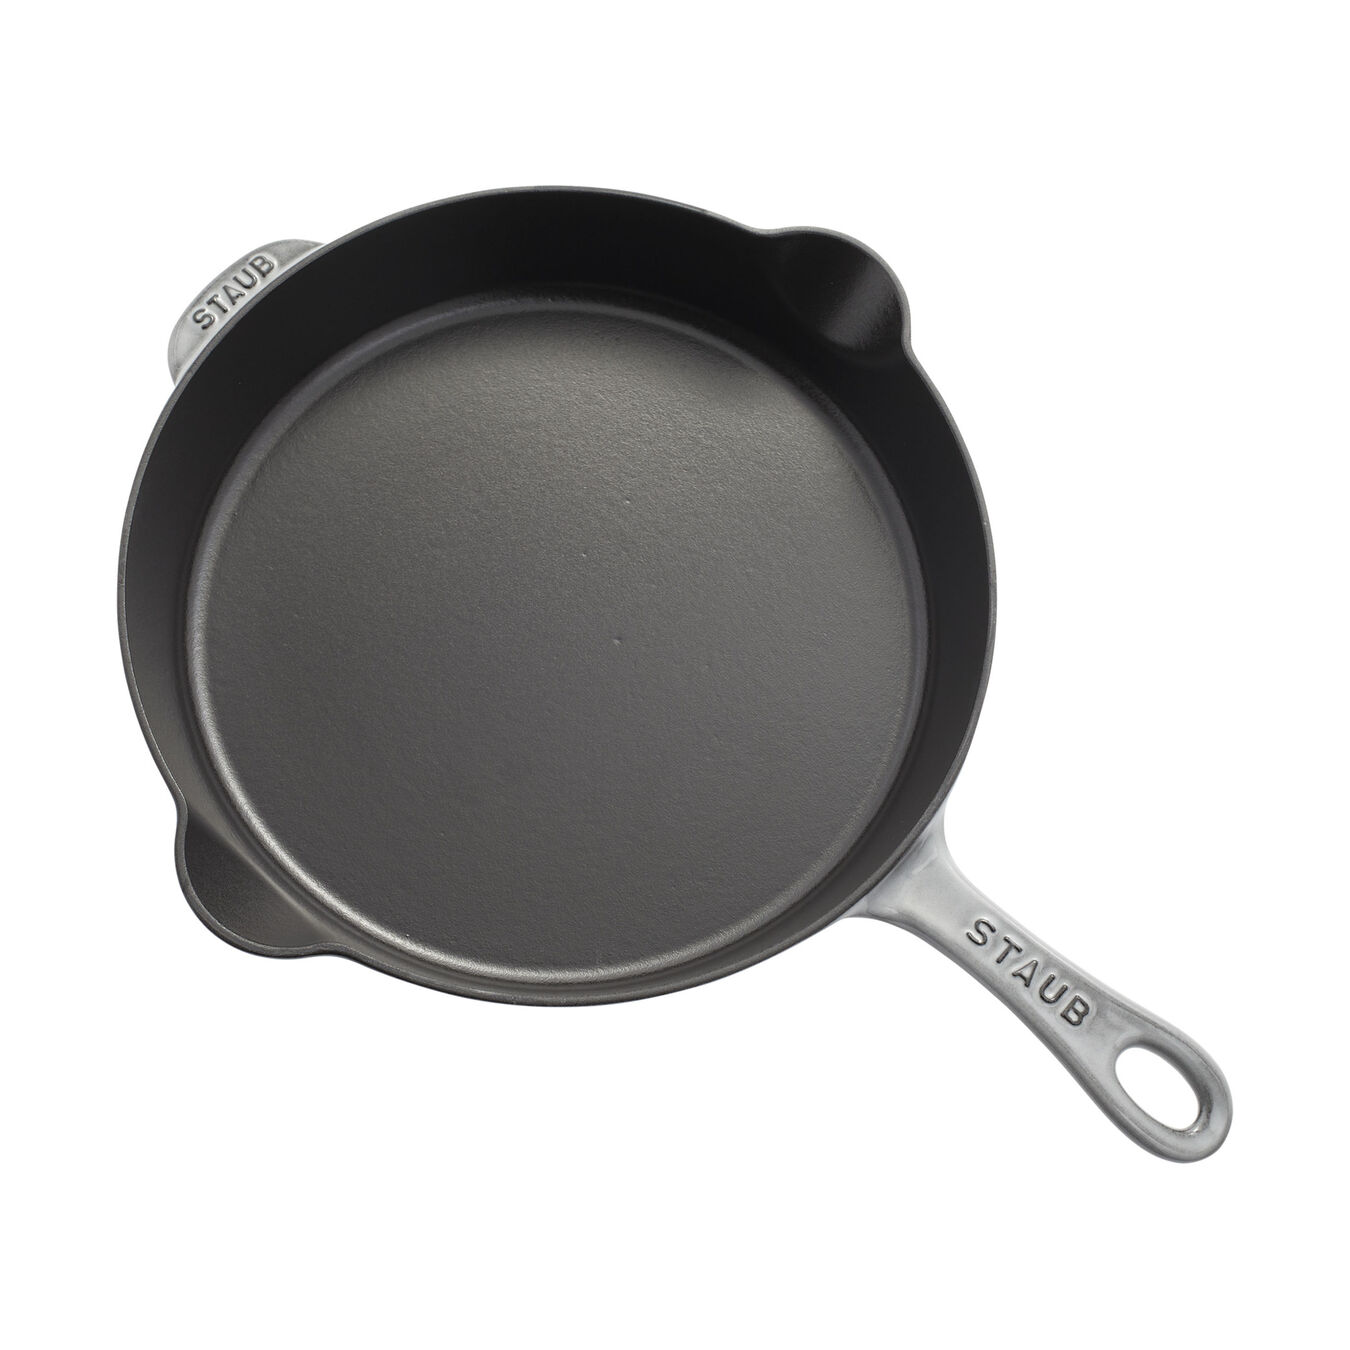 28 cm / 11 inch cast iron Frying pan, graphite-grey - Visual Imperfections,,large 3